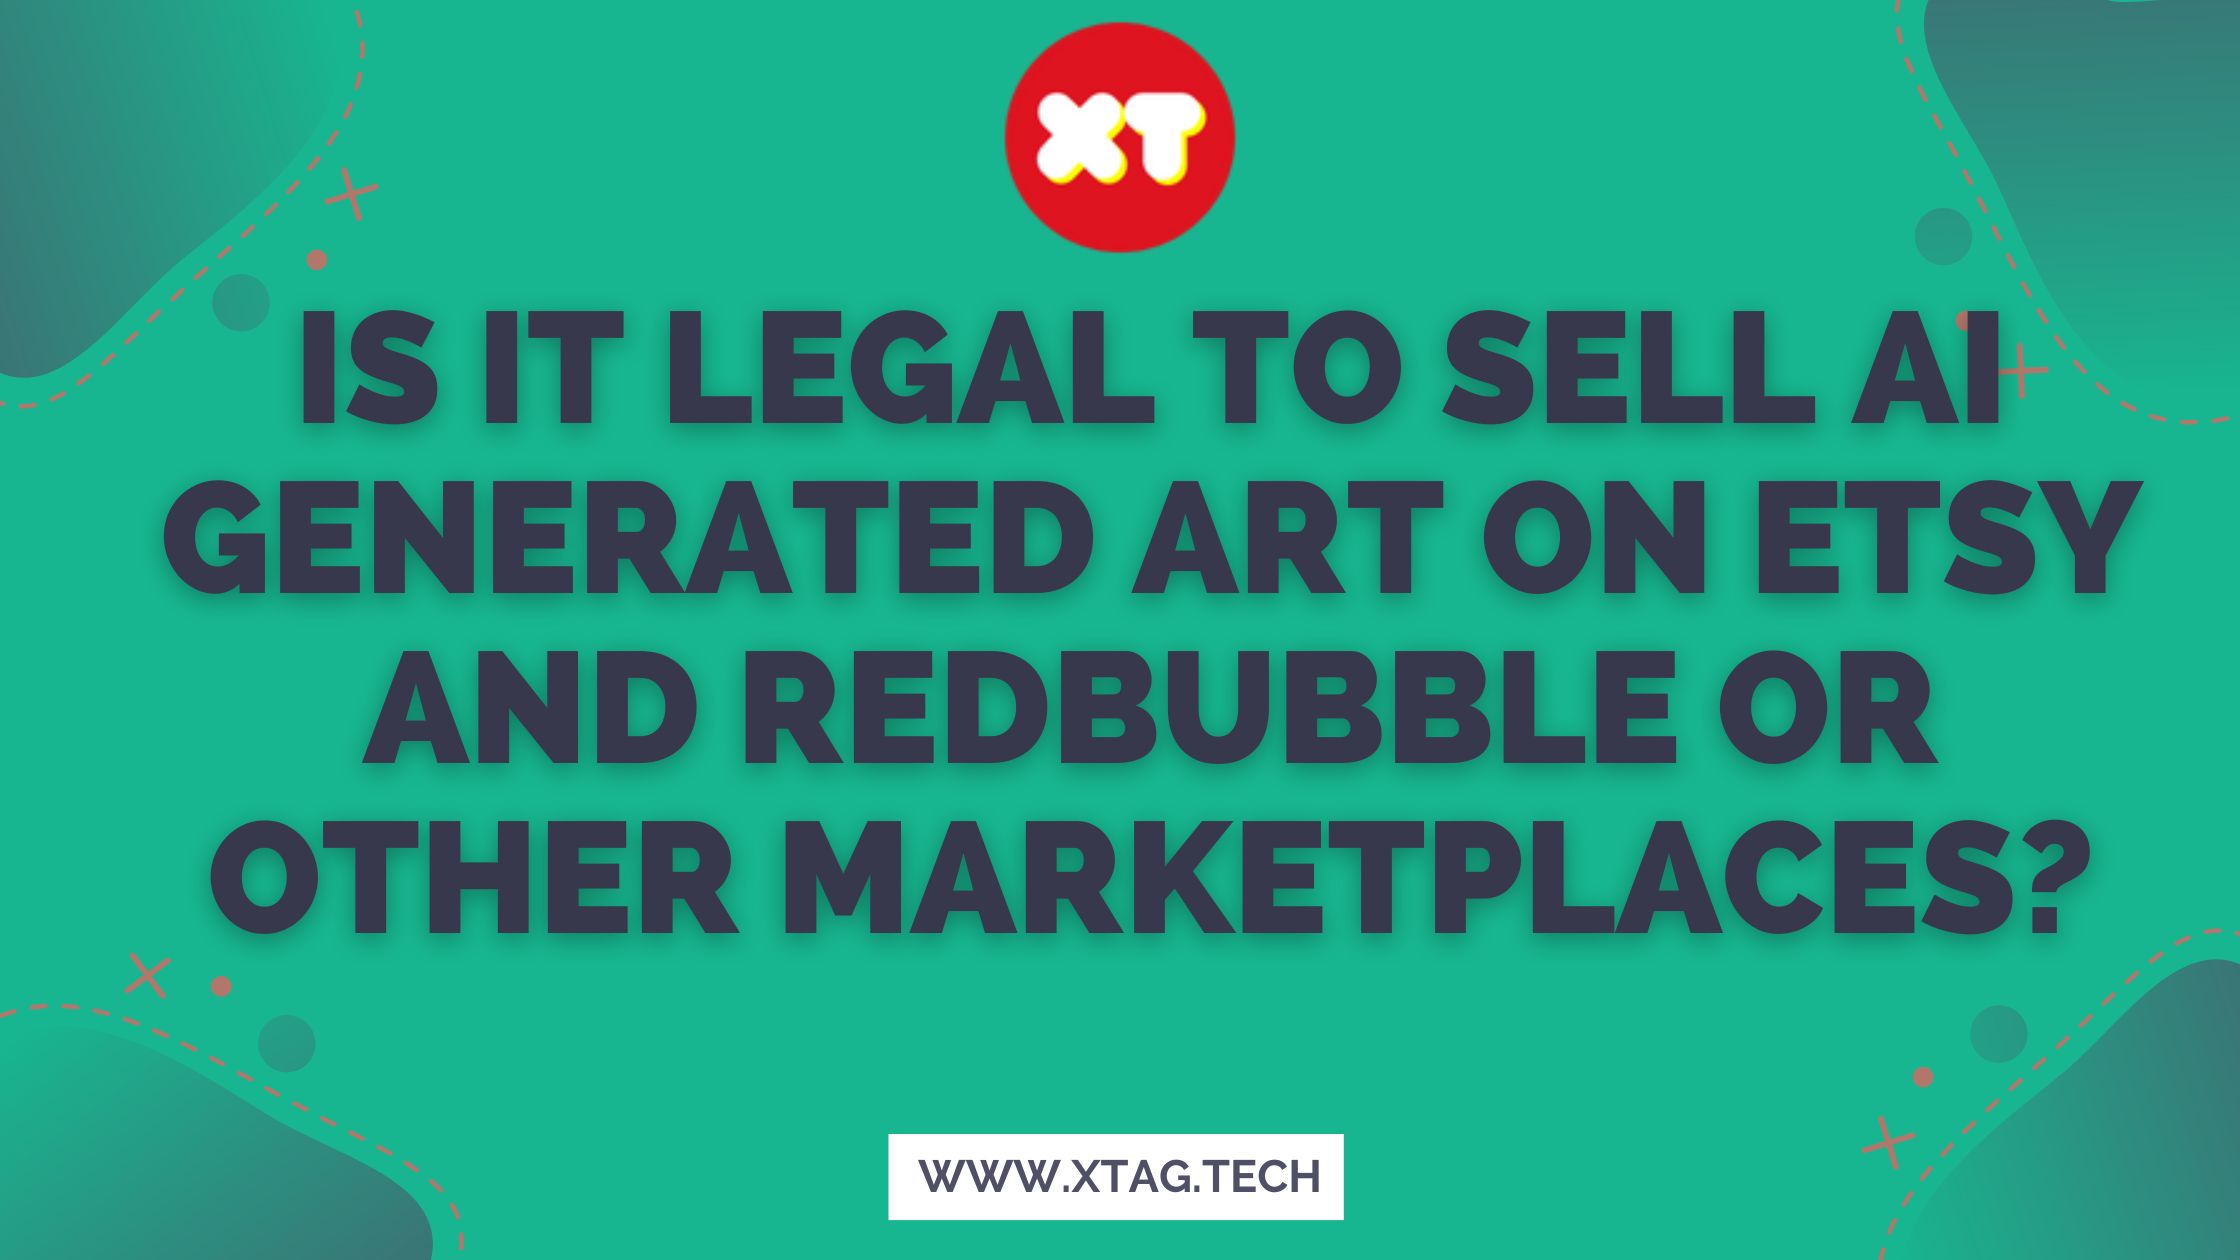 Is It Legal To Sell Ai Generated Art On Etsy And Redbubble Or Other Marketplaces?